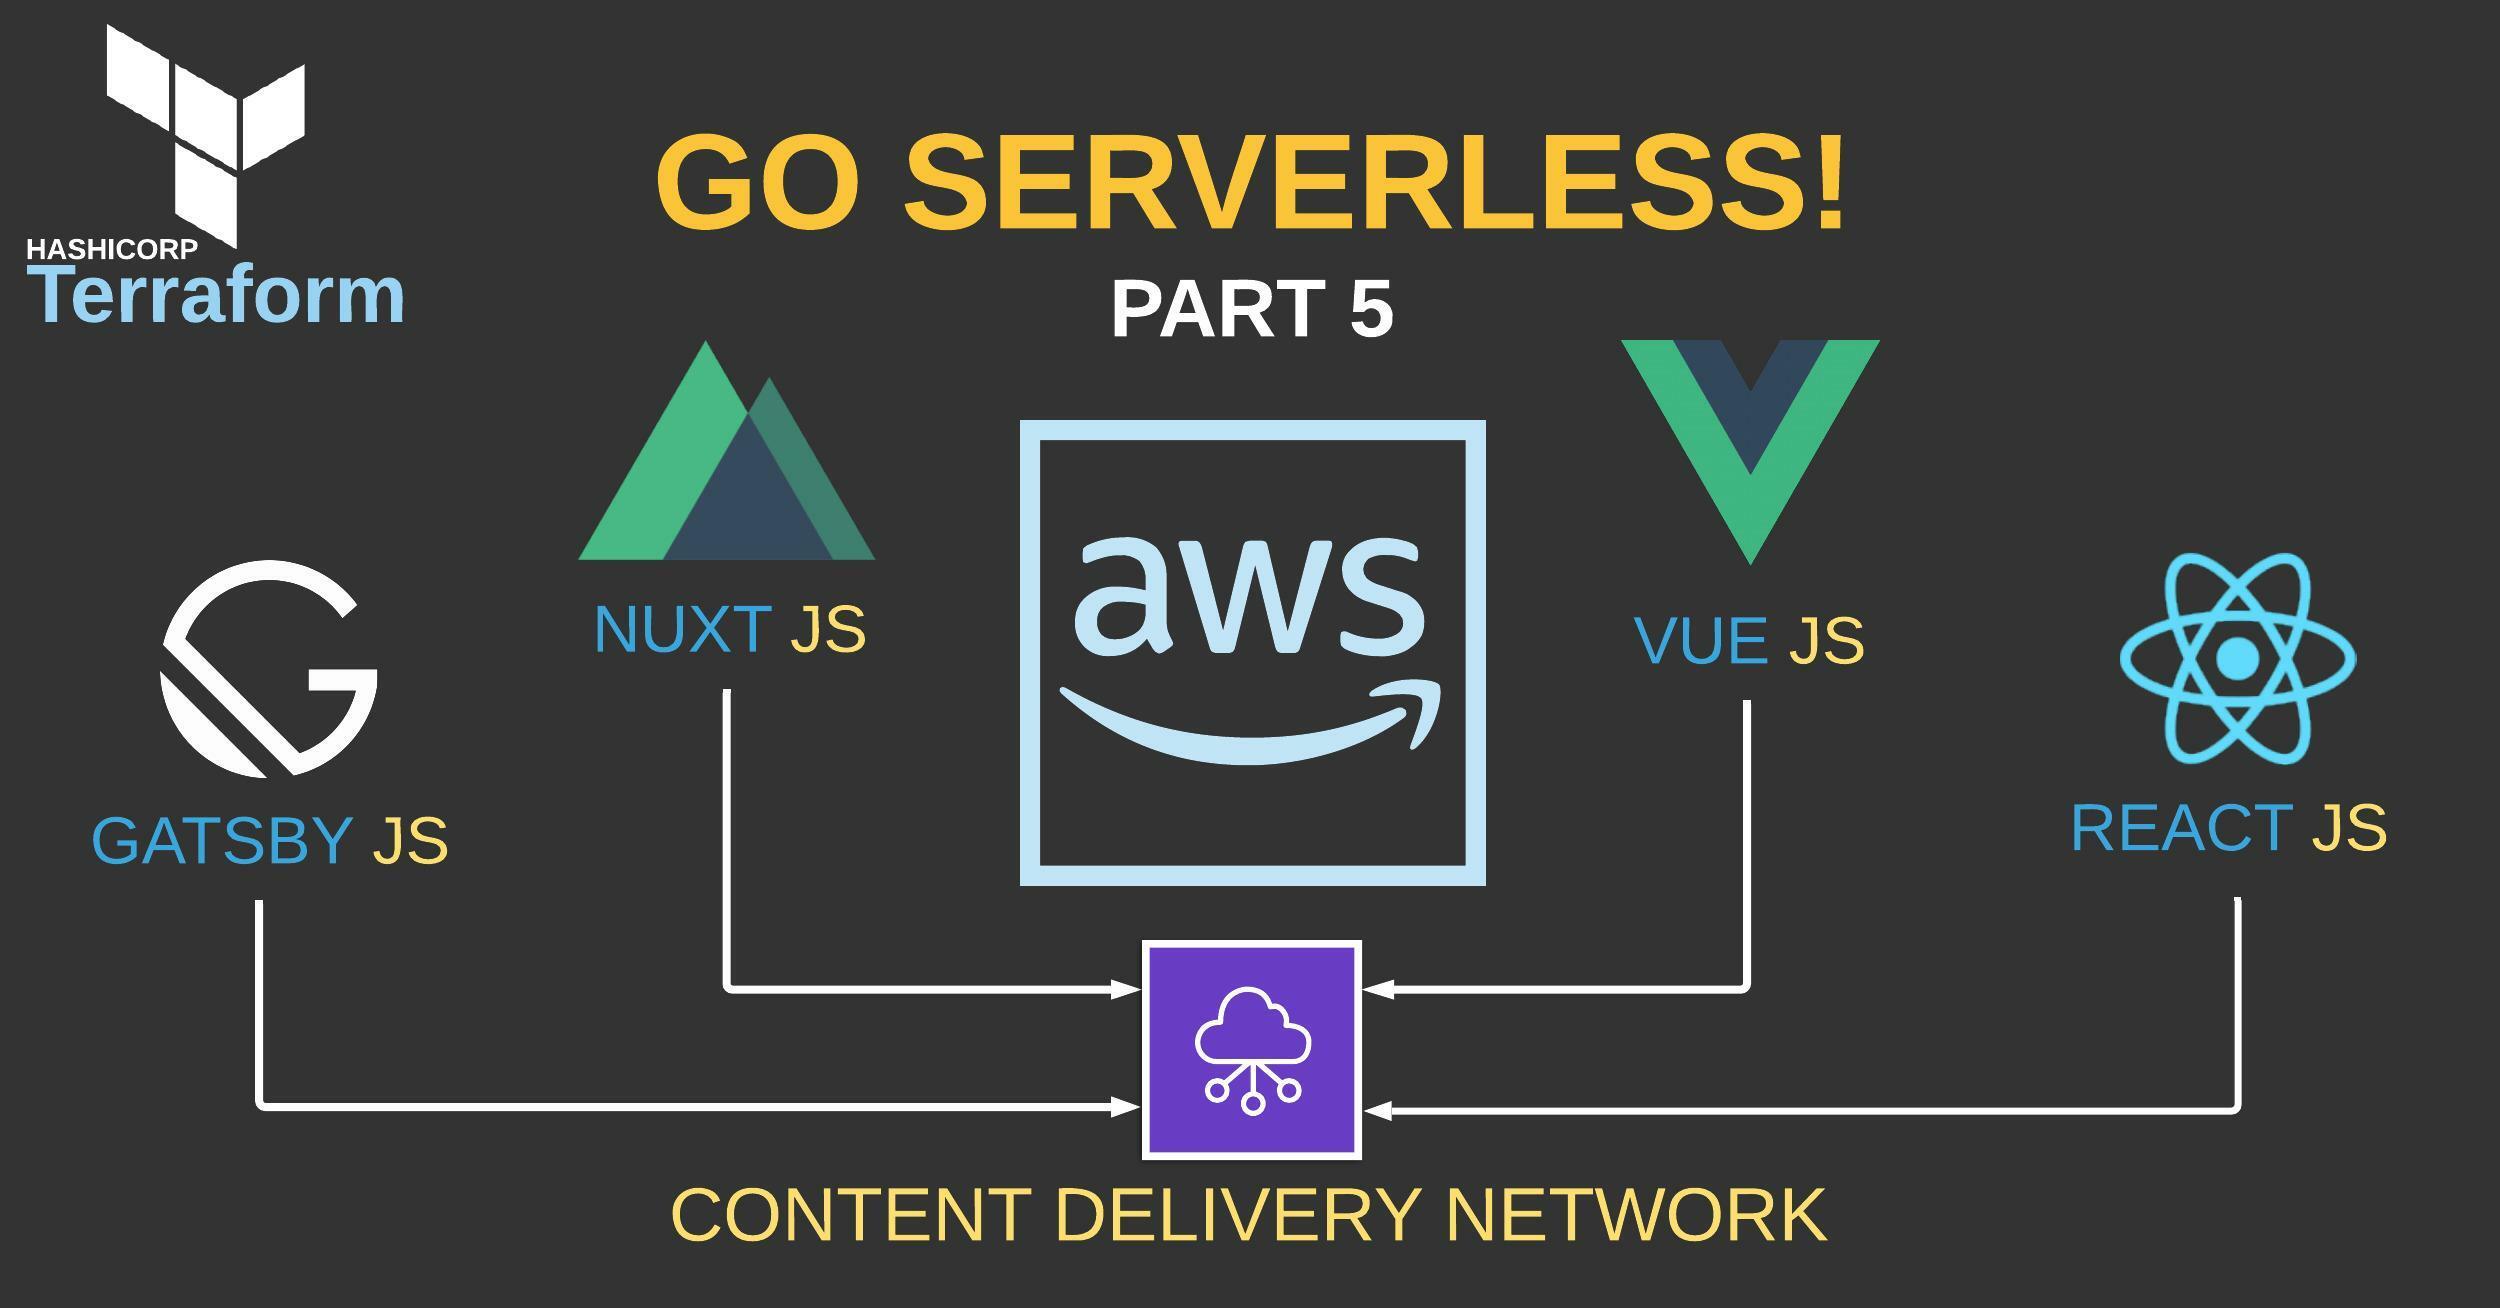 GO Serverless! Part 5 - Preview and Ship Static Web Applications and Private Media with S3 and Cloudfront